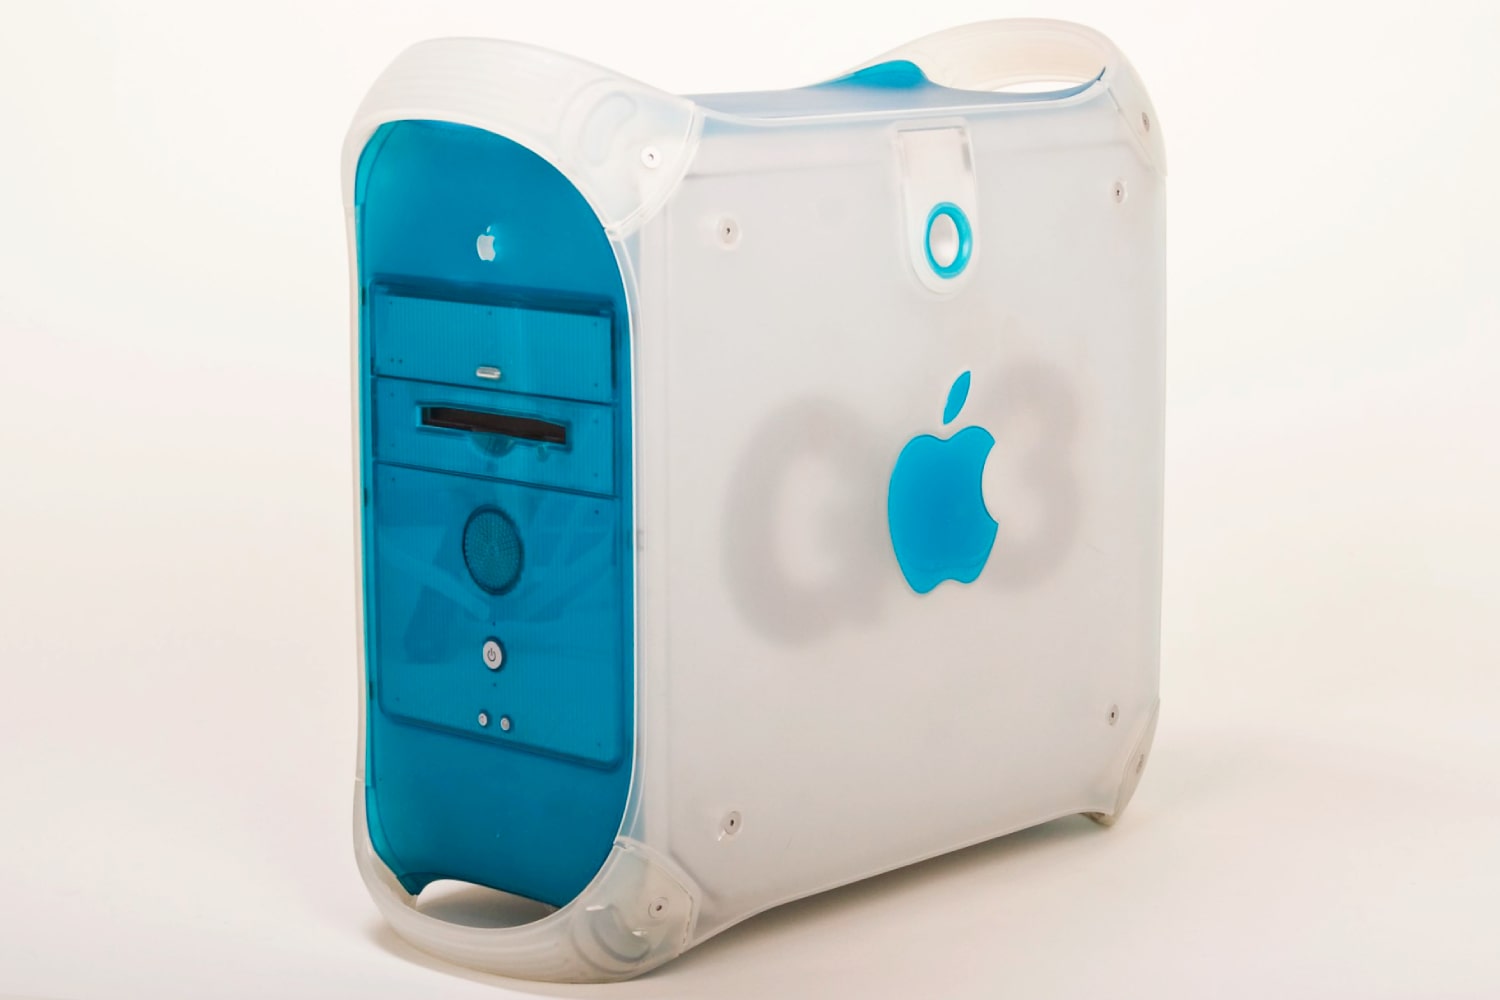 The Apple Power Mac G3 Blue and White against a white background.